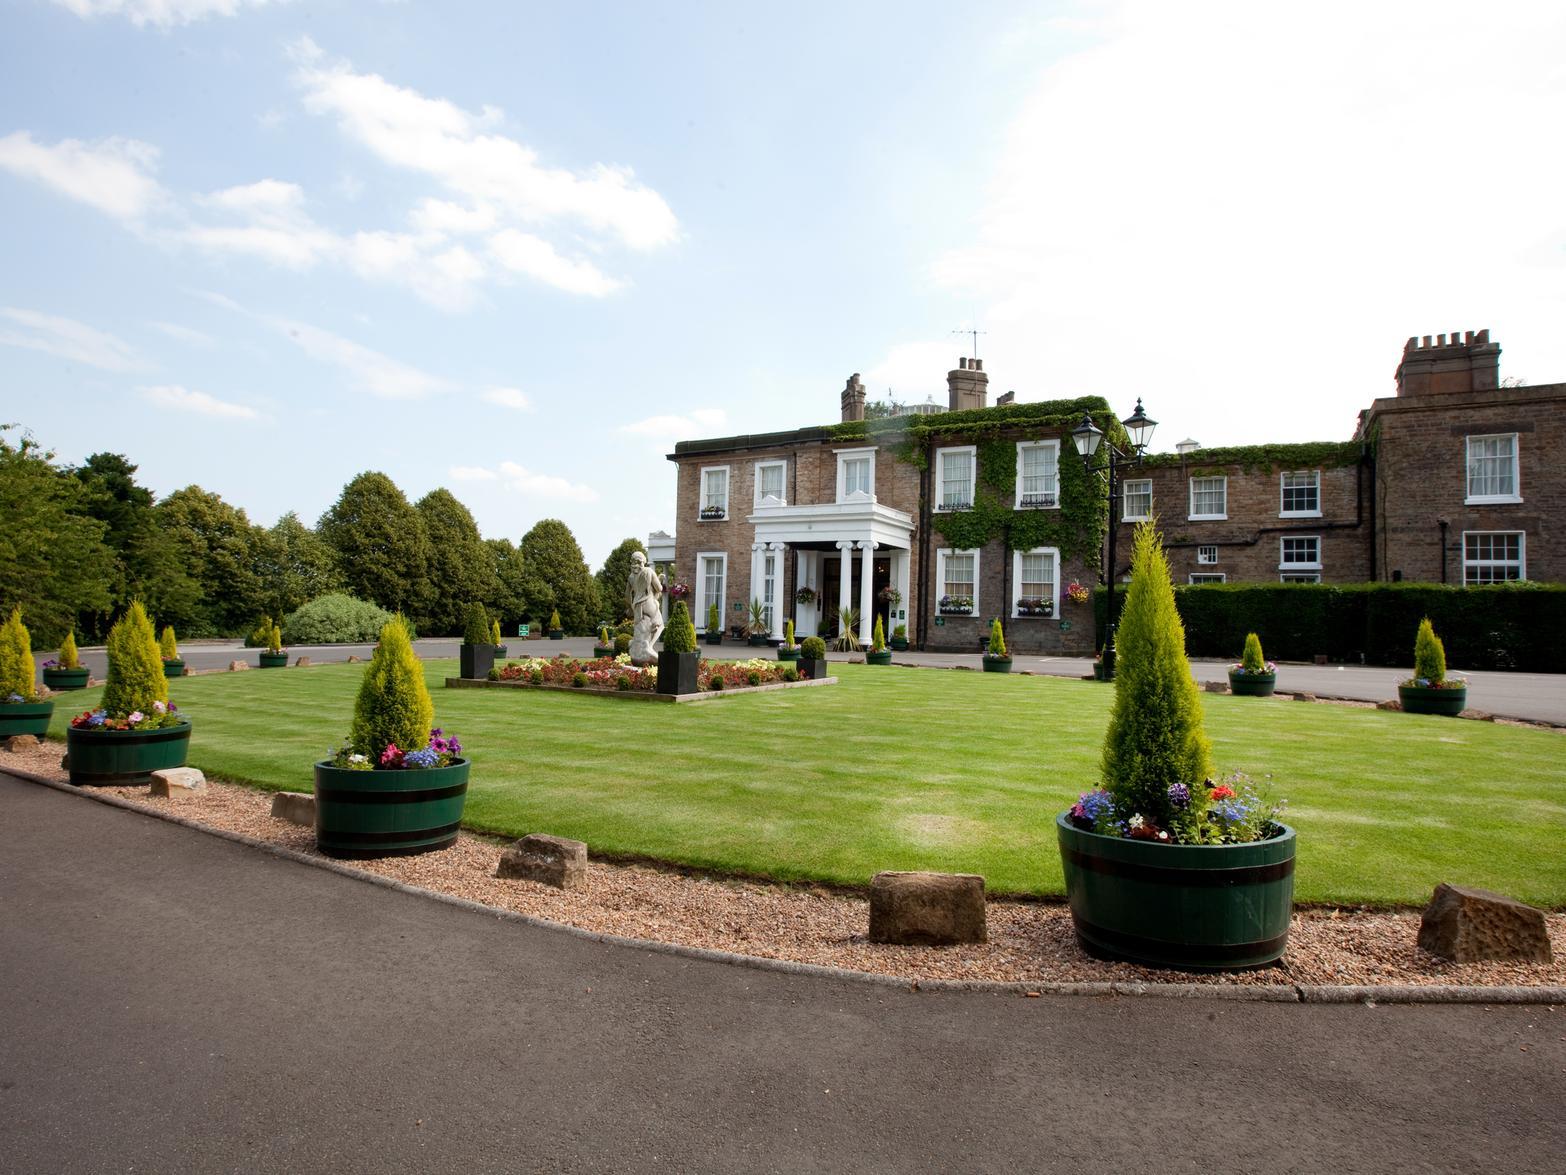 Ringwood Hall and Spa is a 4-star retreat set in a beautiful 19th century manor house, where your pet can be whisked away for their own special day with a pet sitting service, exclusive to Ringwood Hall.